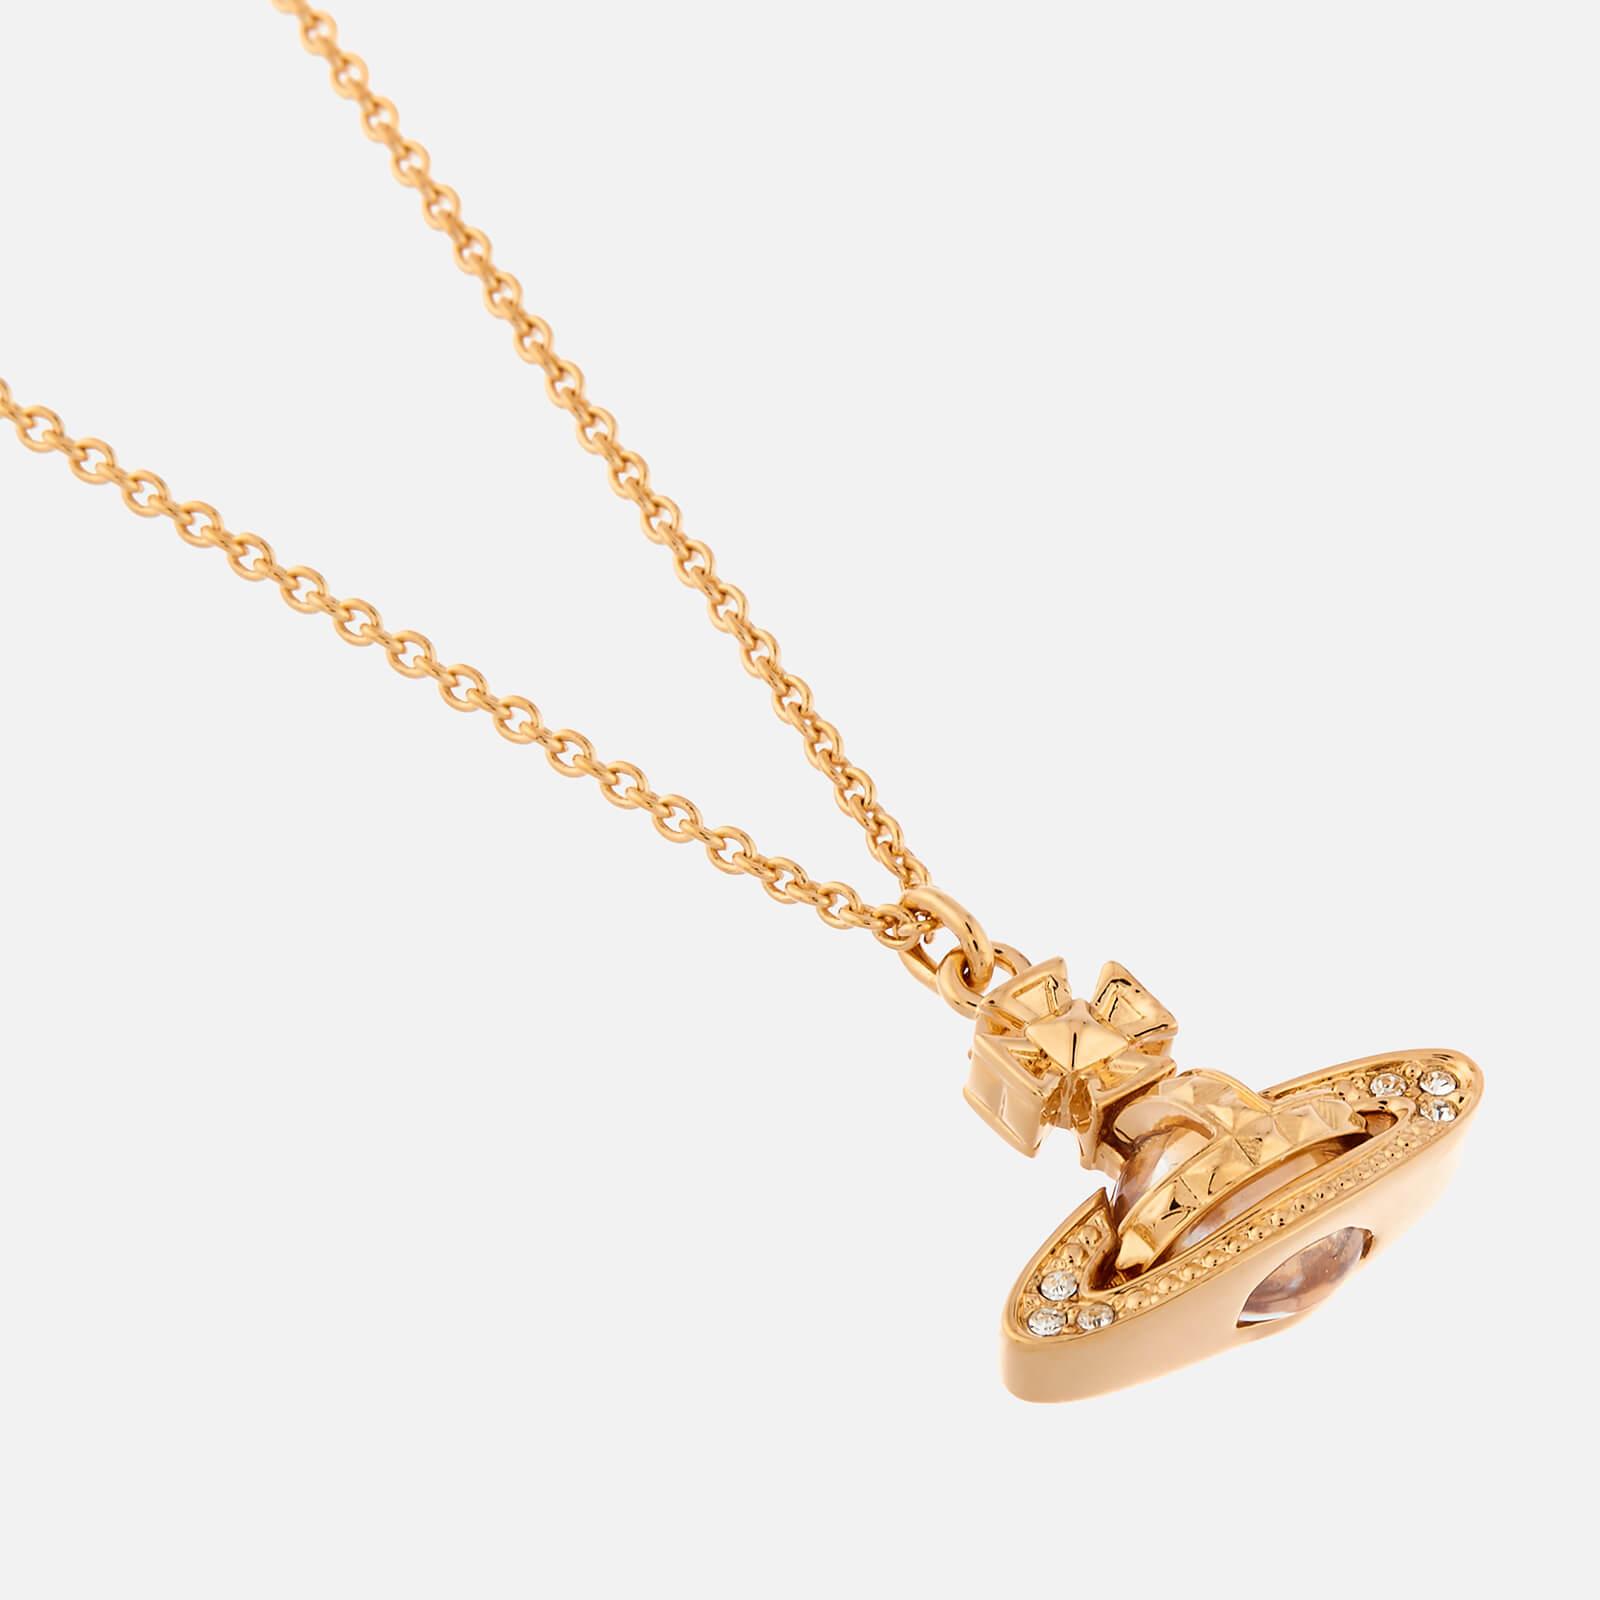 Vivienne Westwood Pina Small Bas Relief Pendant in Gold (Metallic) - Lyst